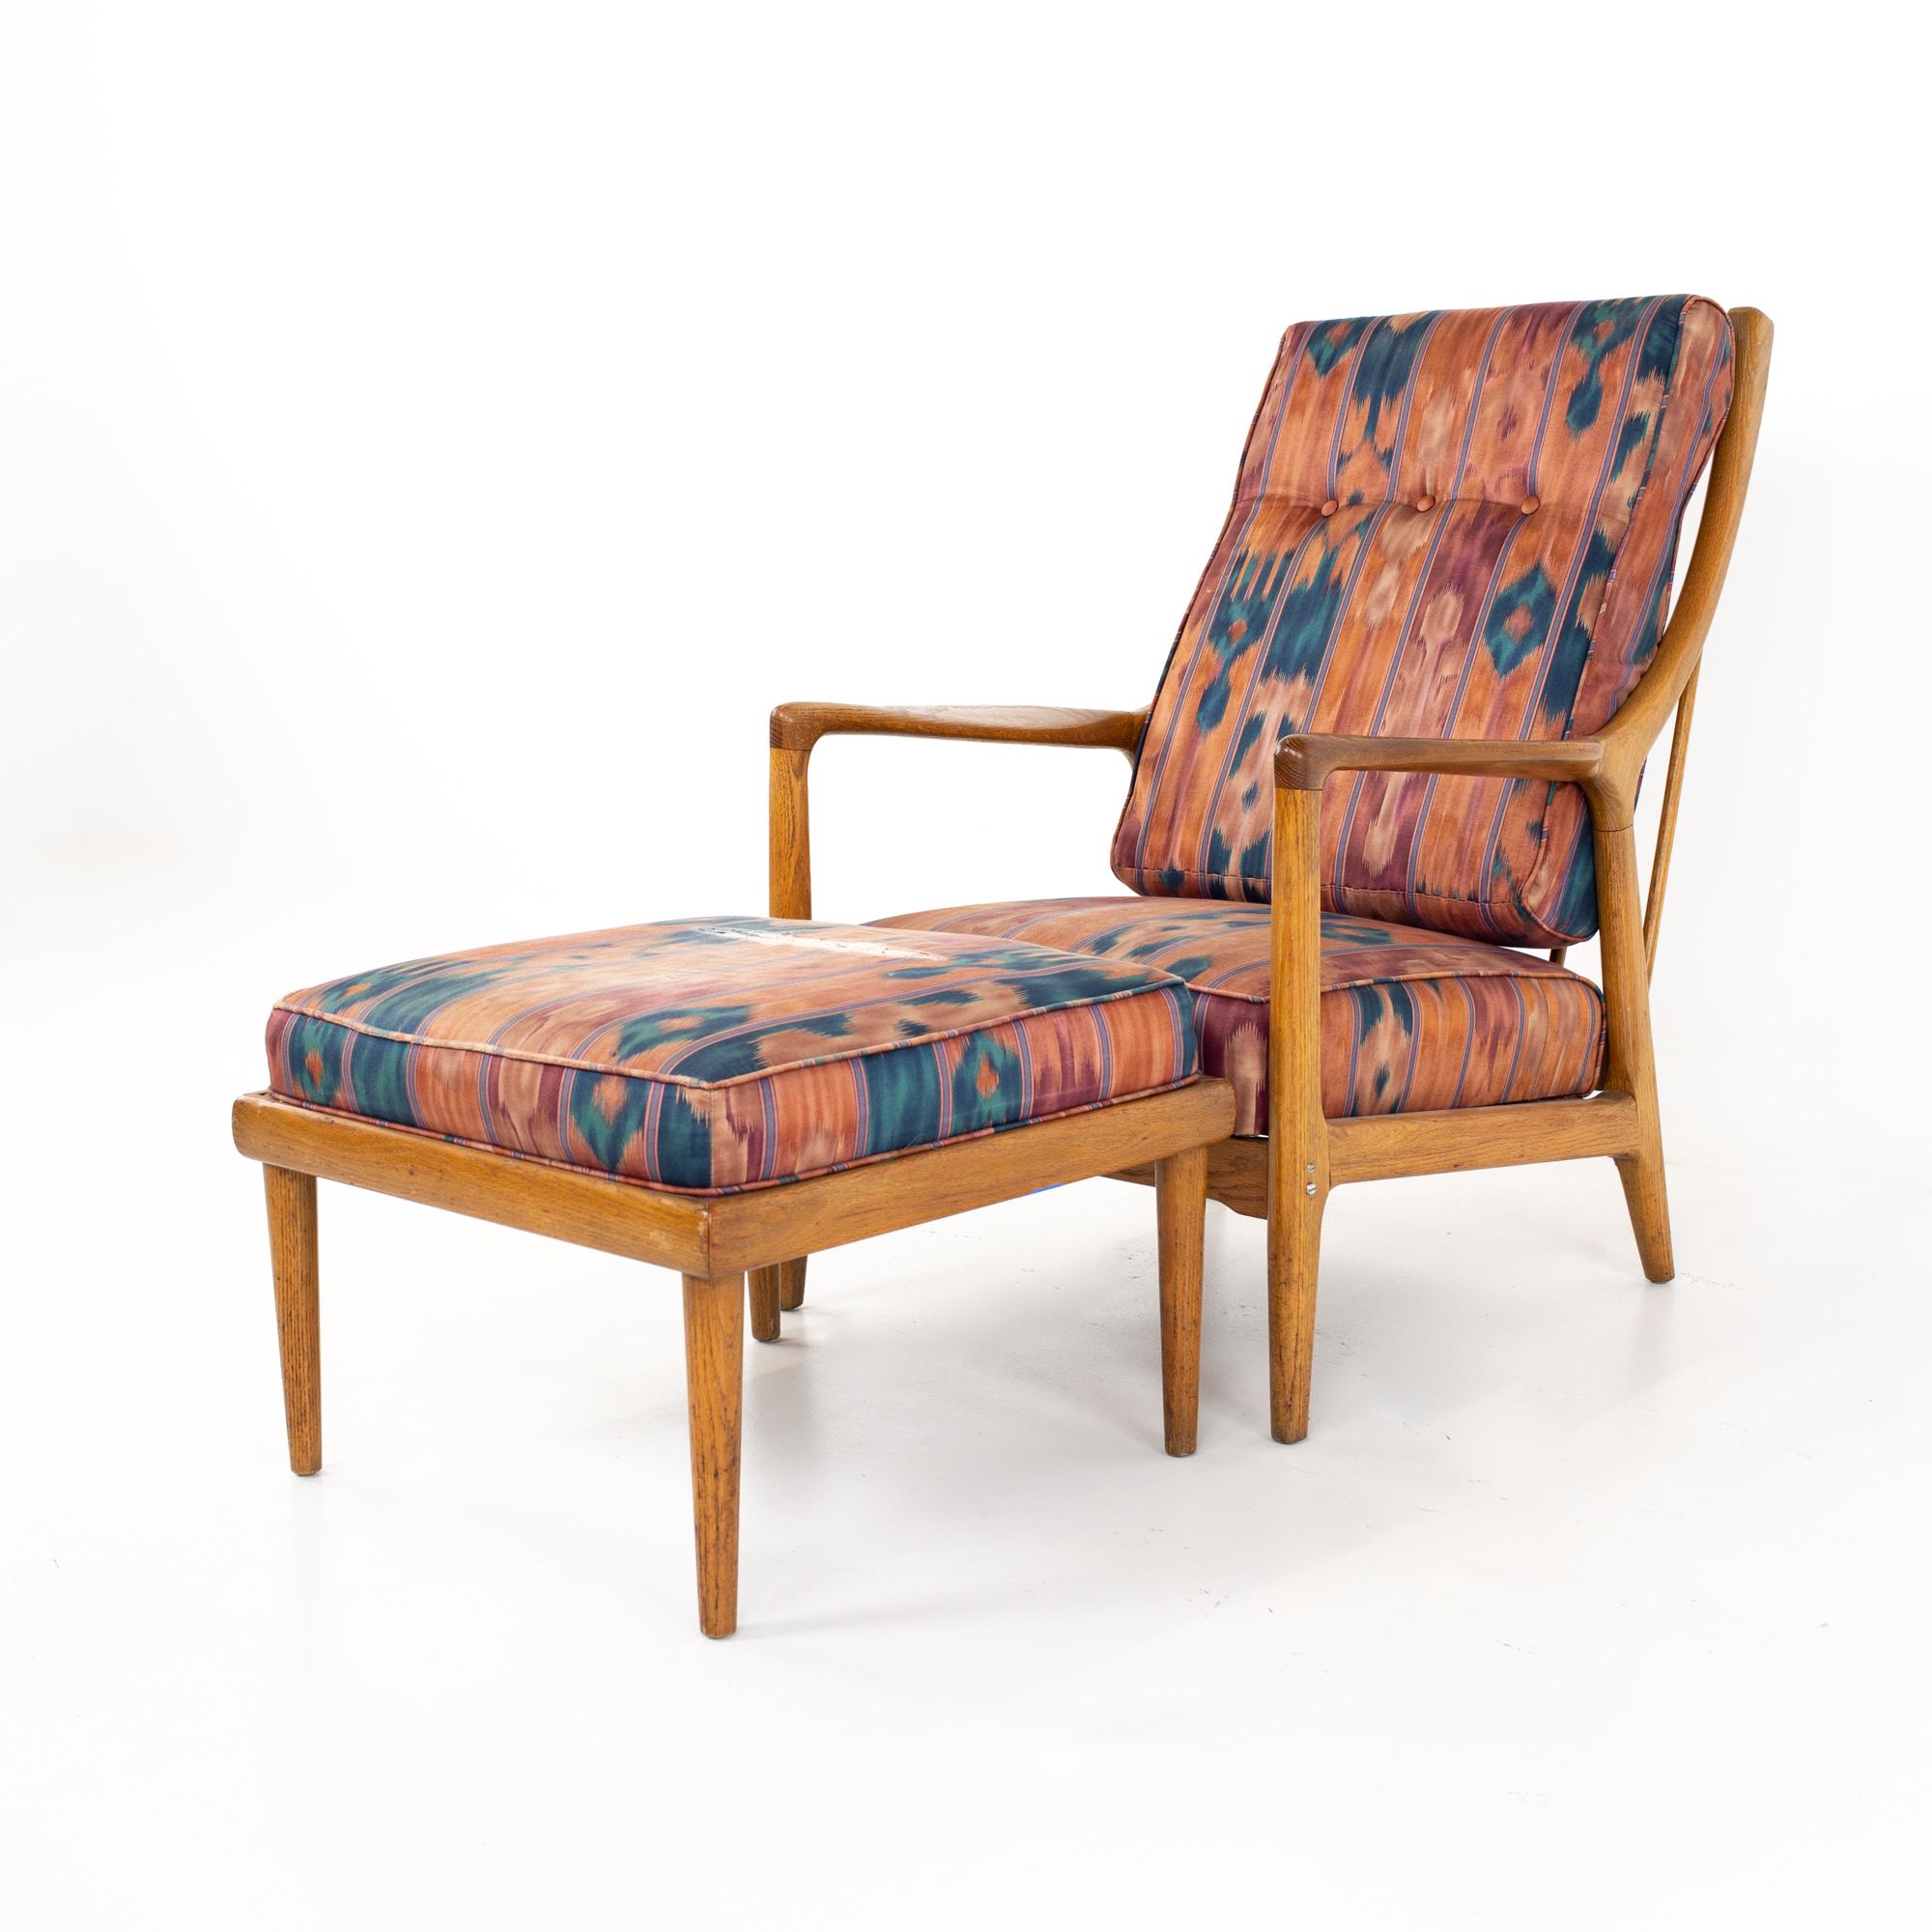 Jack Van der Molen mid century blonde oak lounge chair and ottoman
Chair measures: 27 wide x 33.5 deep x 37 high, with a seat height of 13.5 and arm height of 21.75 inches


All pieces of furniture can be had in what we call restored vintage